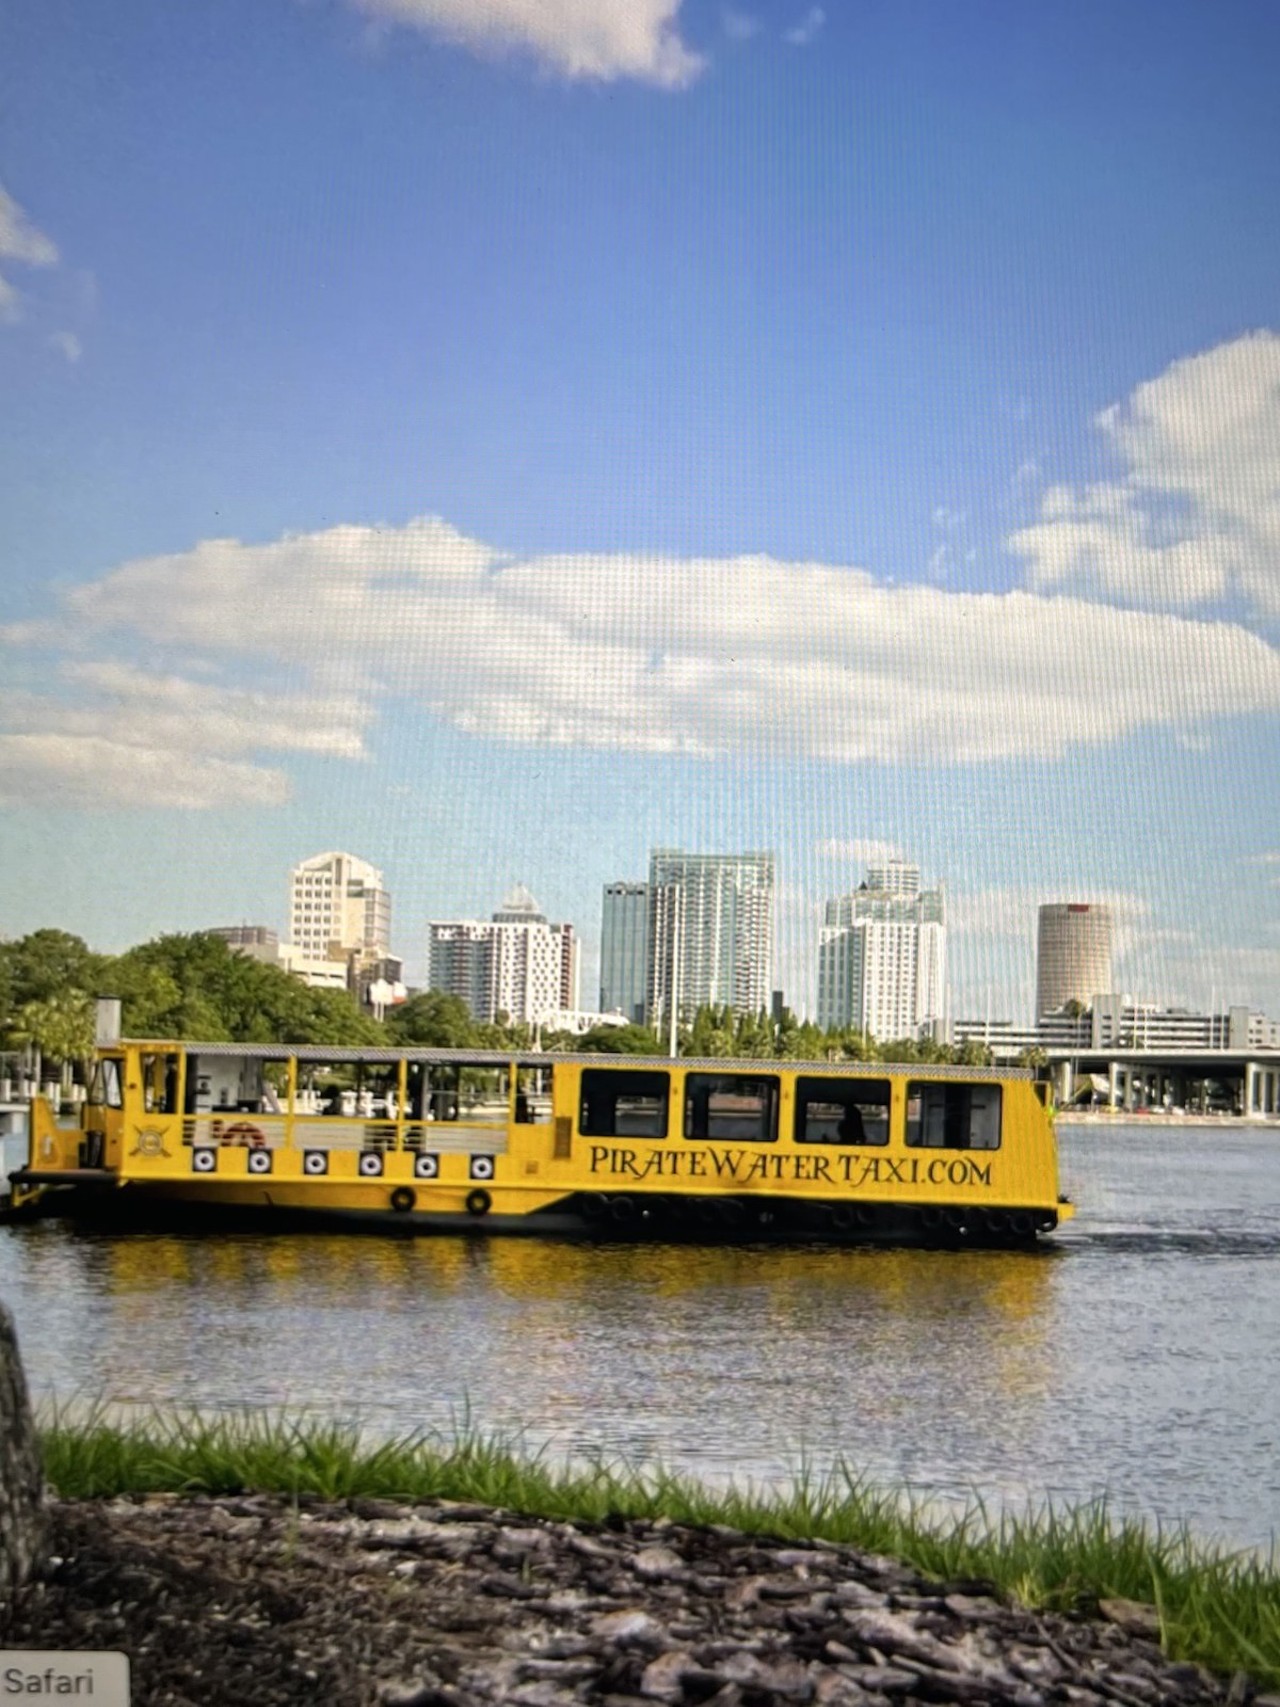 Pirate Water Taxi
603 Channelside Dr., Tampa
The ladies of Allure Realty probably don’t scoot across the water with the proletariat, but these trusty yellow skiffs are a fun way for the rest of us to scoot up and down the Hillsborough River.